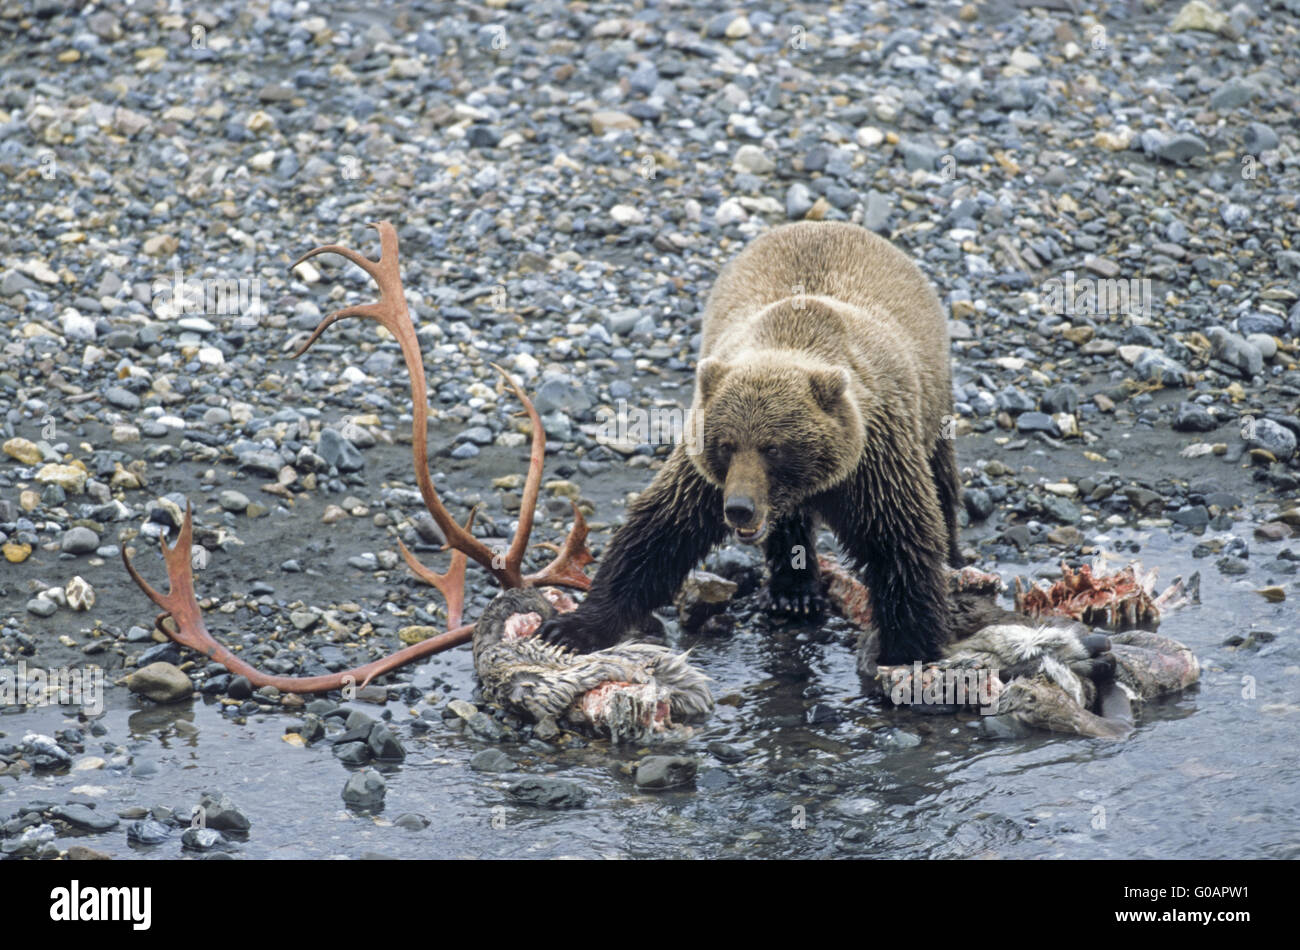 Grizzly Bear standing near a Caribou cadaver Stock Photo